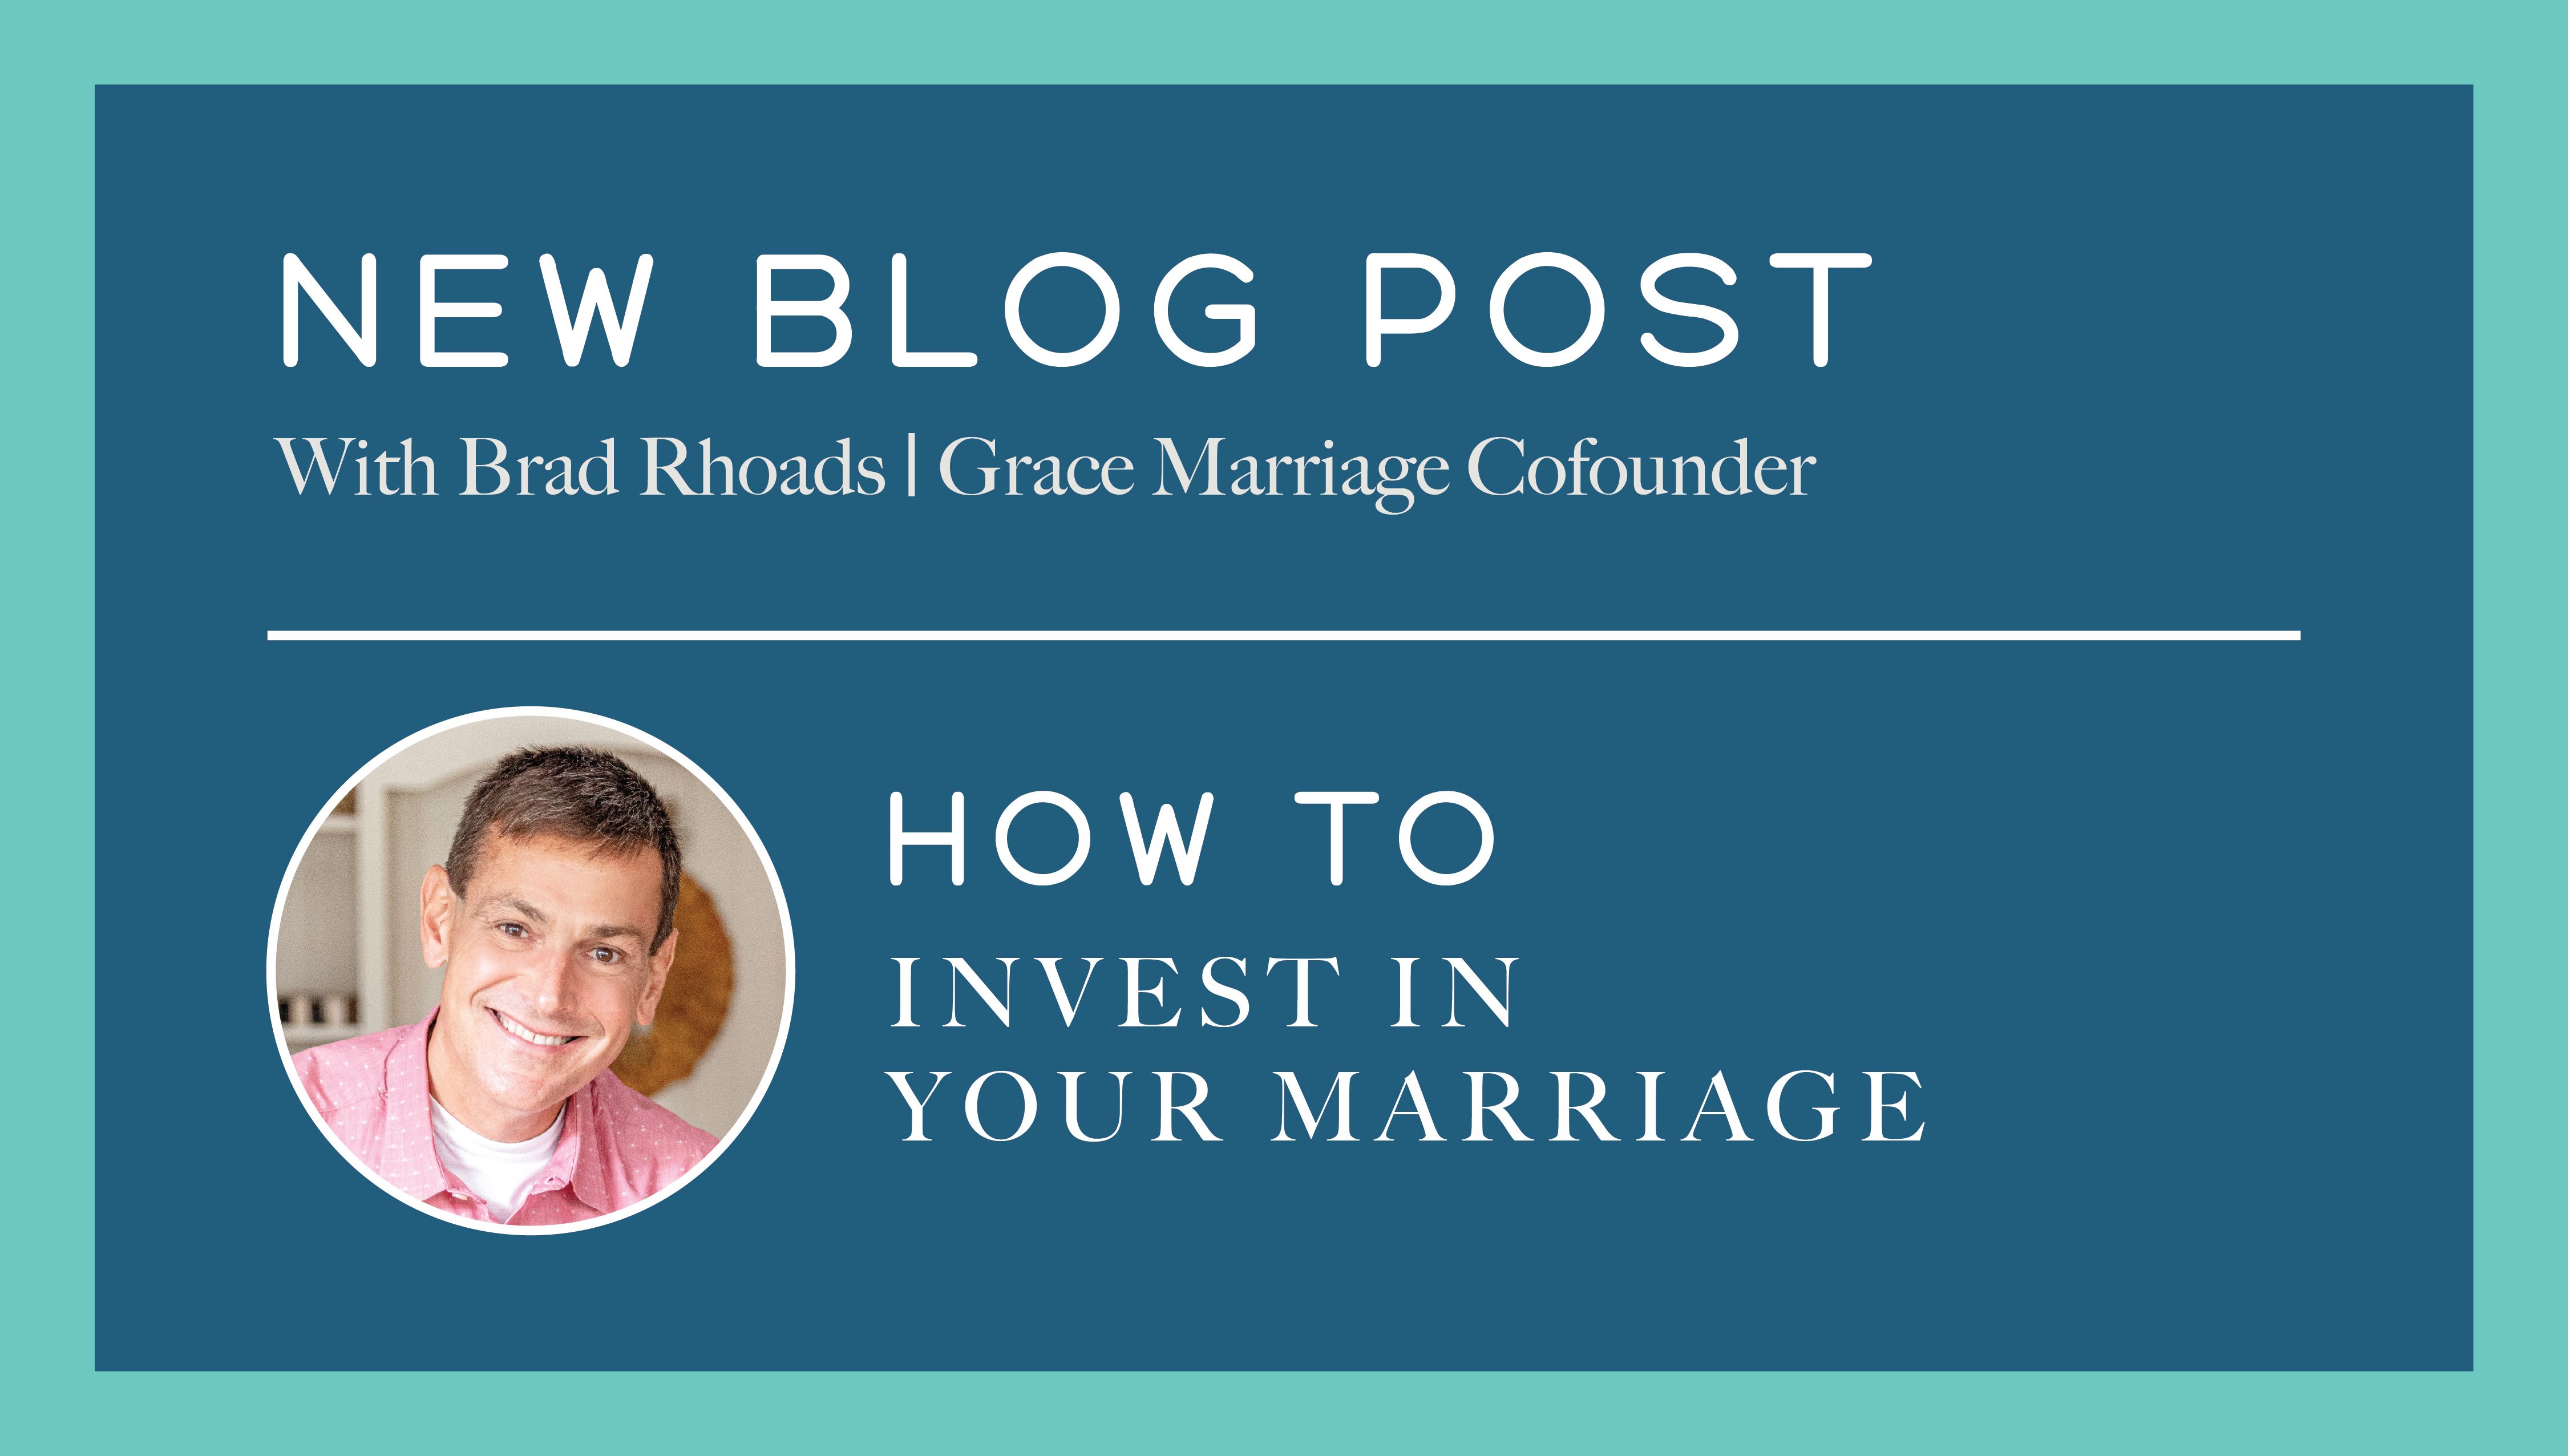 How to Invest in Your Marriage